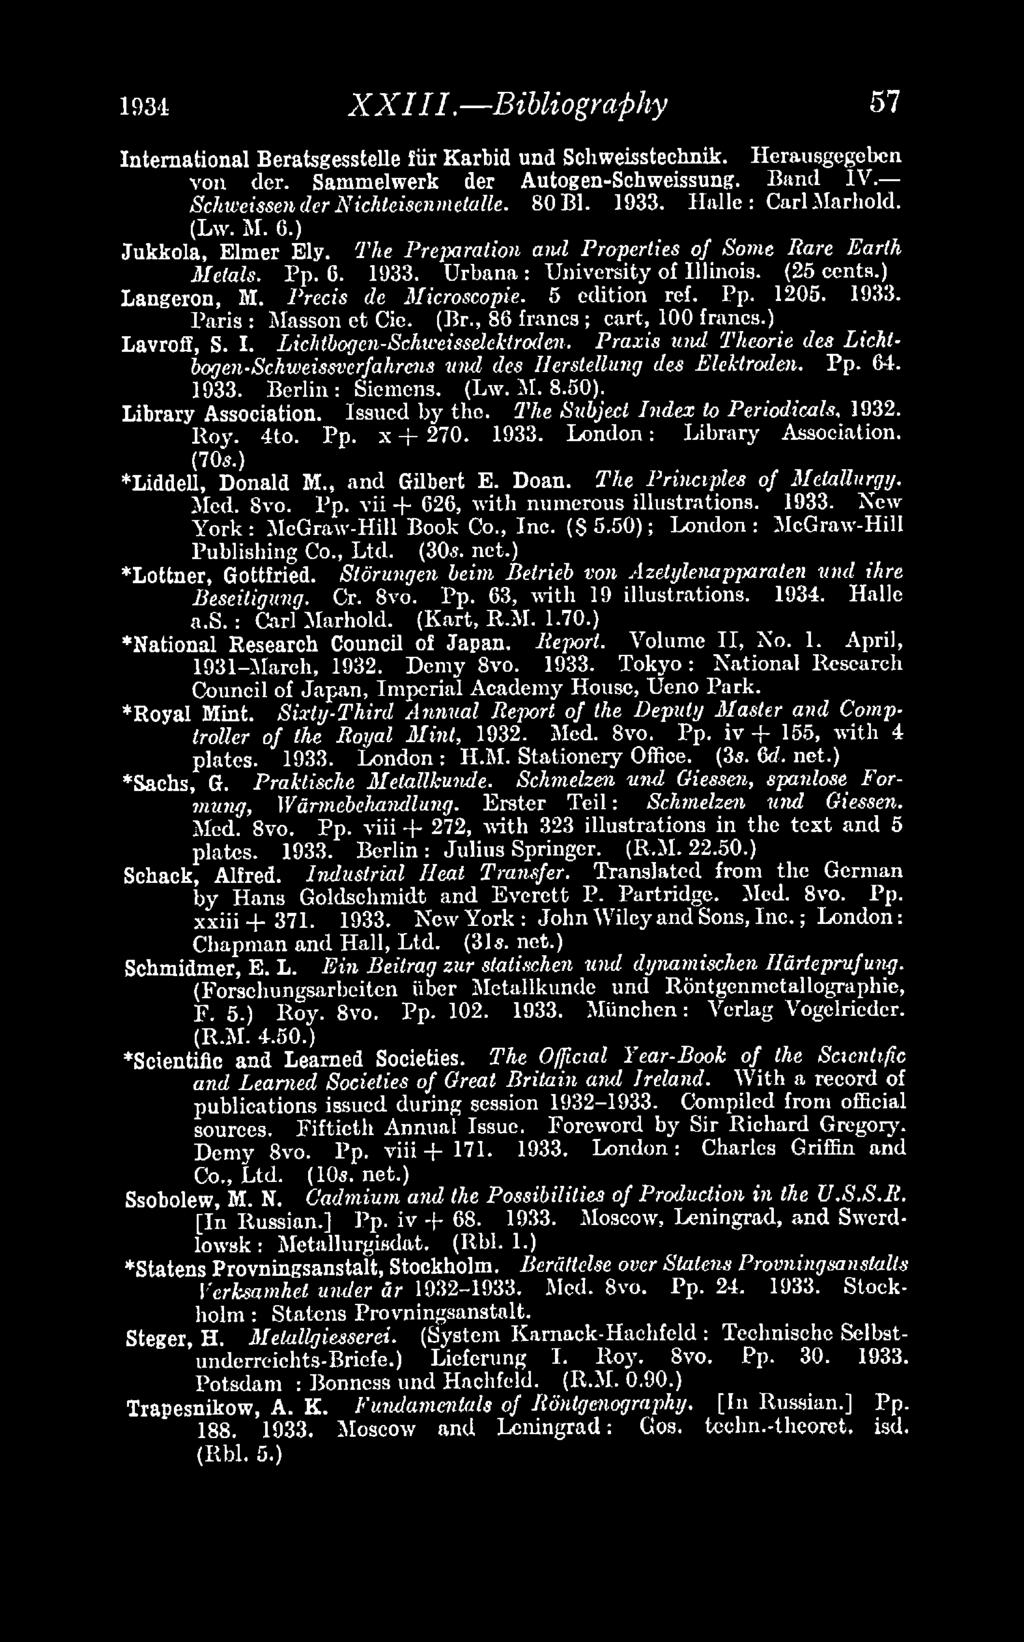 The Subject Index to Periodicals. 1032. Roy. 4to. Pp. x + 270. 1933. London: Library Association. (70*'.) Liddell, Donald M., and Gilbert E. Doan. The Principles of Metallurgy. Med. Svo. Pp. vii + 626, with numerous illustrations.